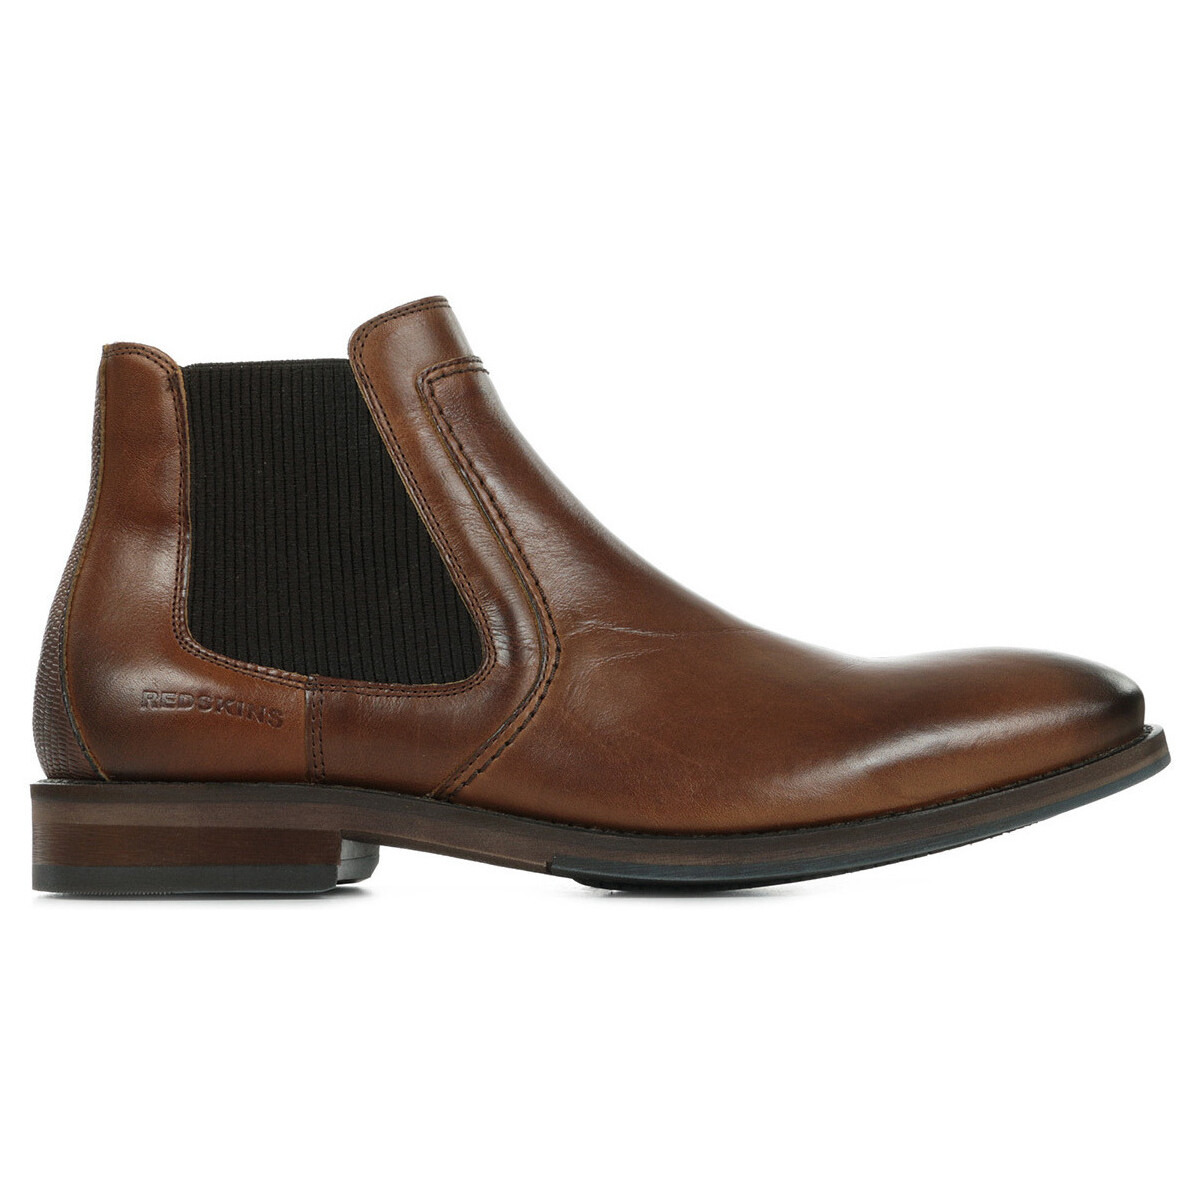 Redskins - Gents Boots in Brown at Spartoo GOOFASH